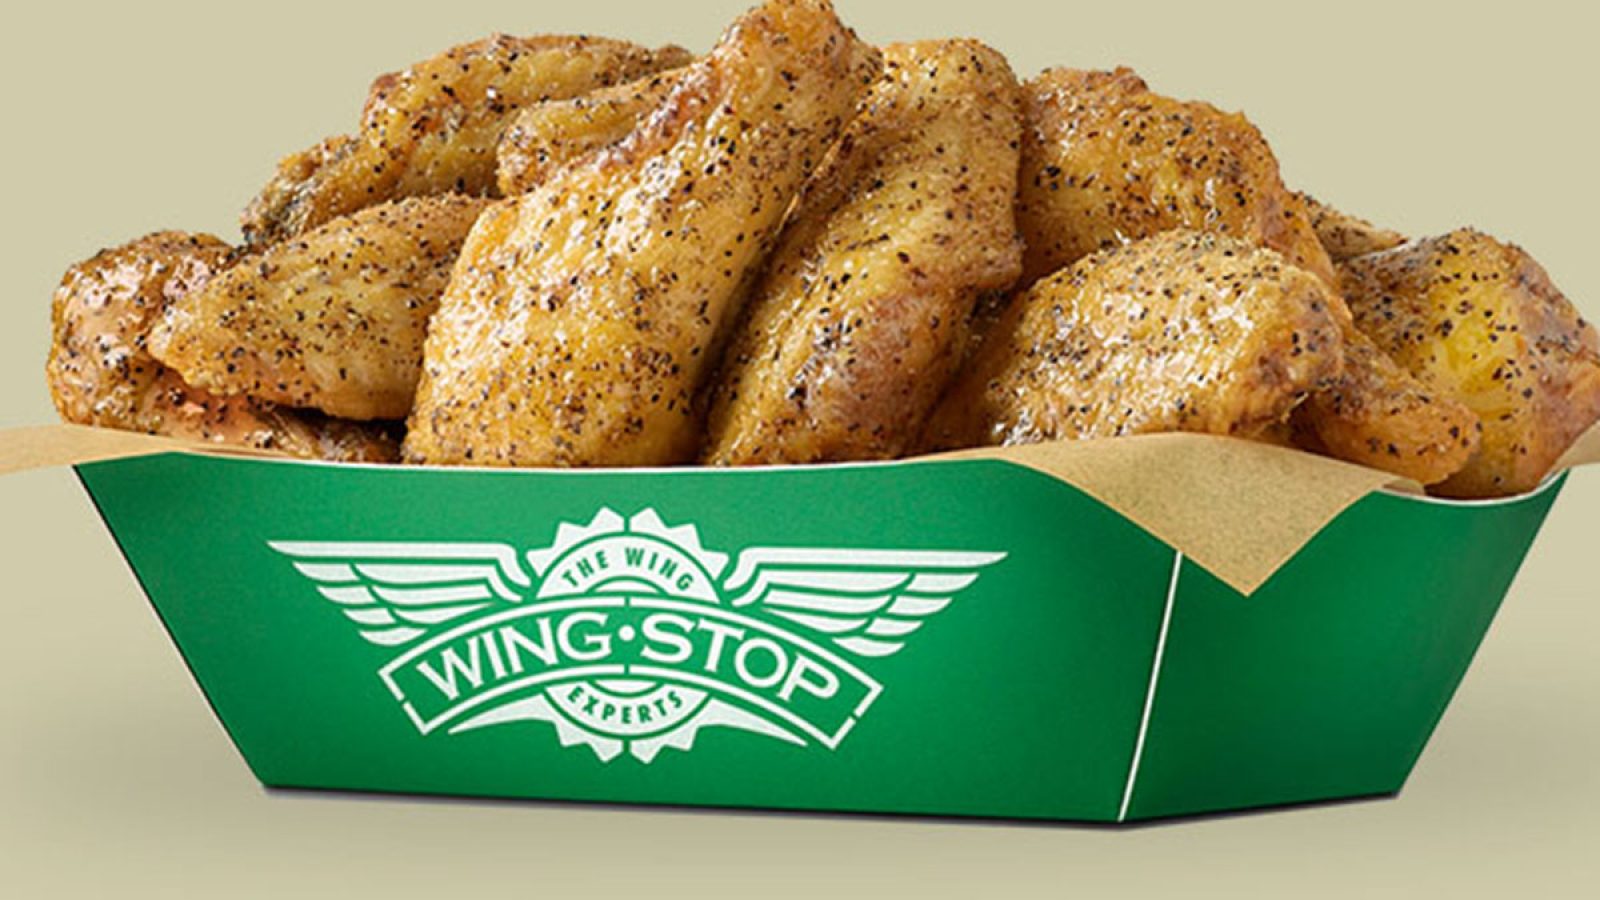 Wingstop Menu The Best and Worst Foods Eat This Not That